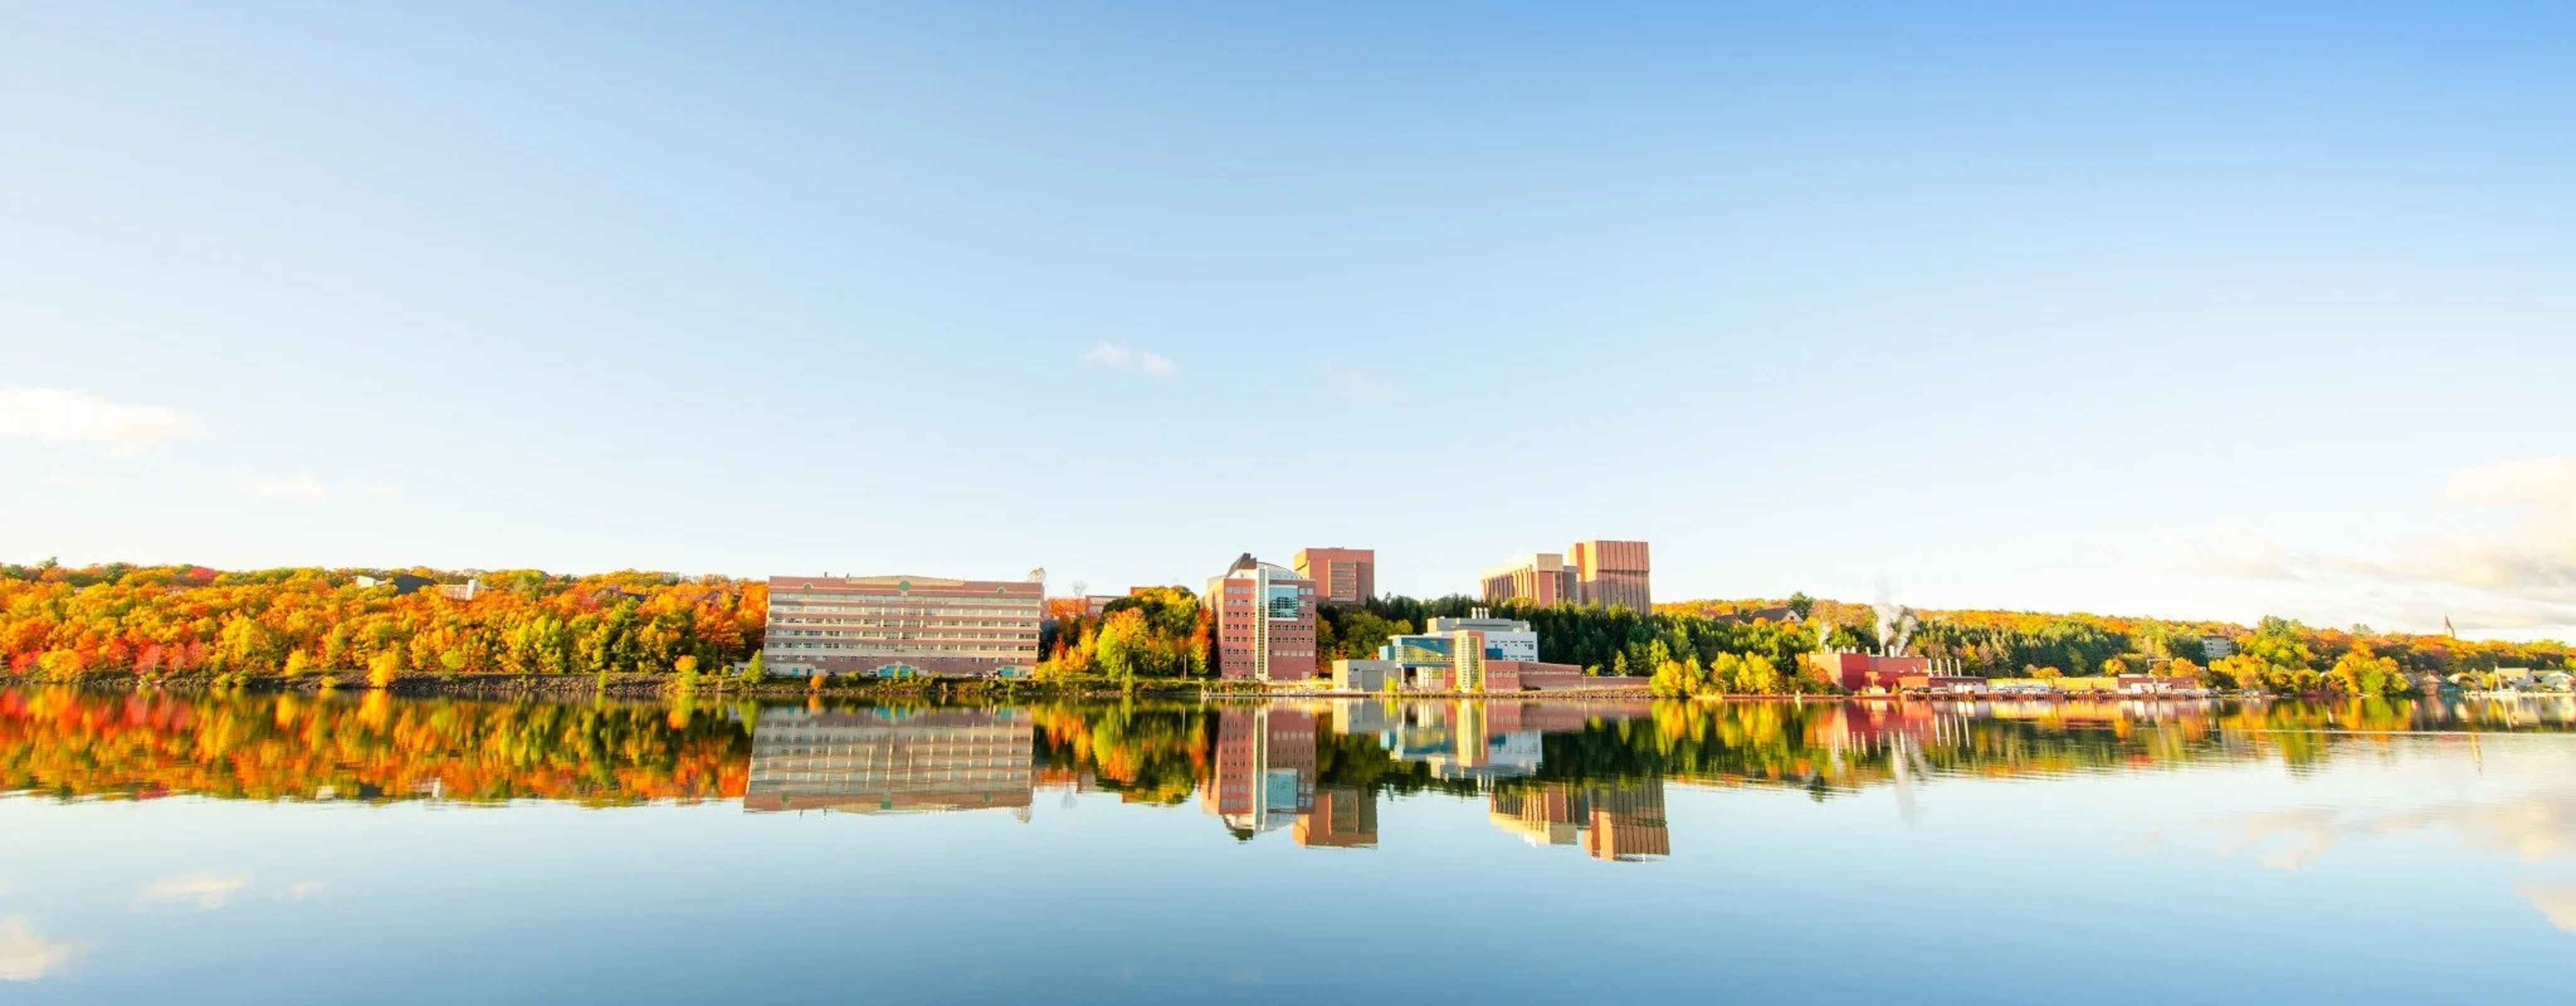 Waterfront view of Michigan Tech's campus